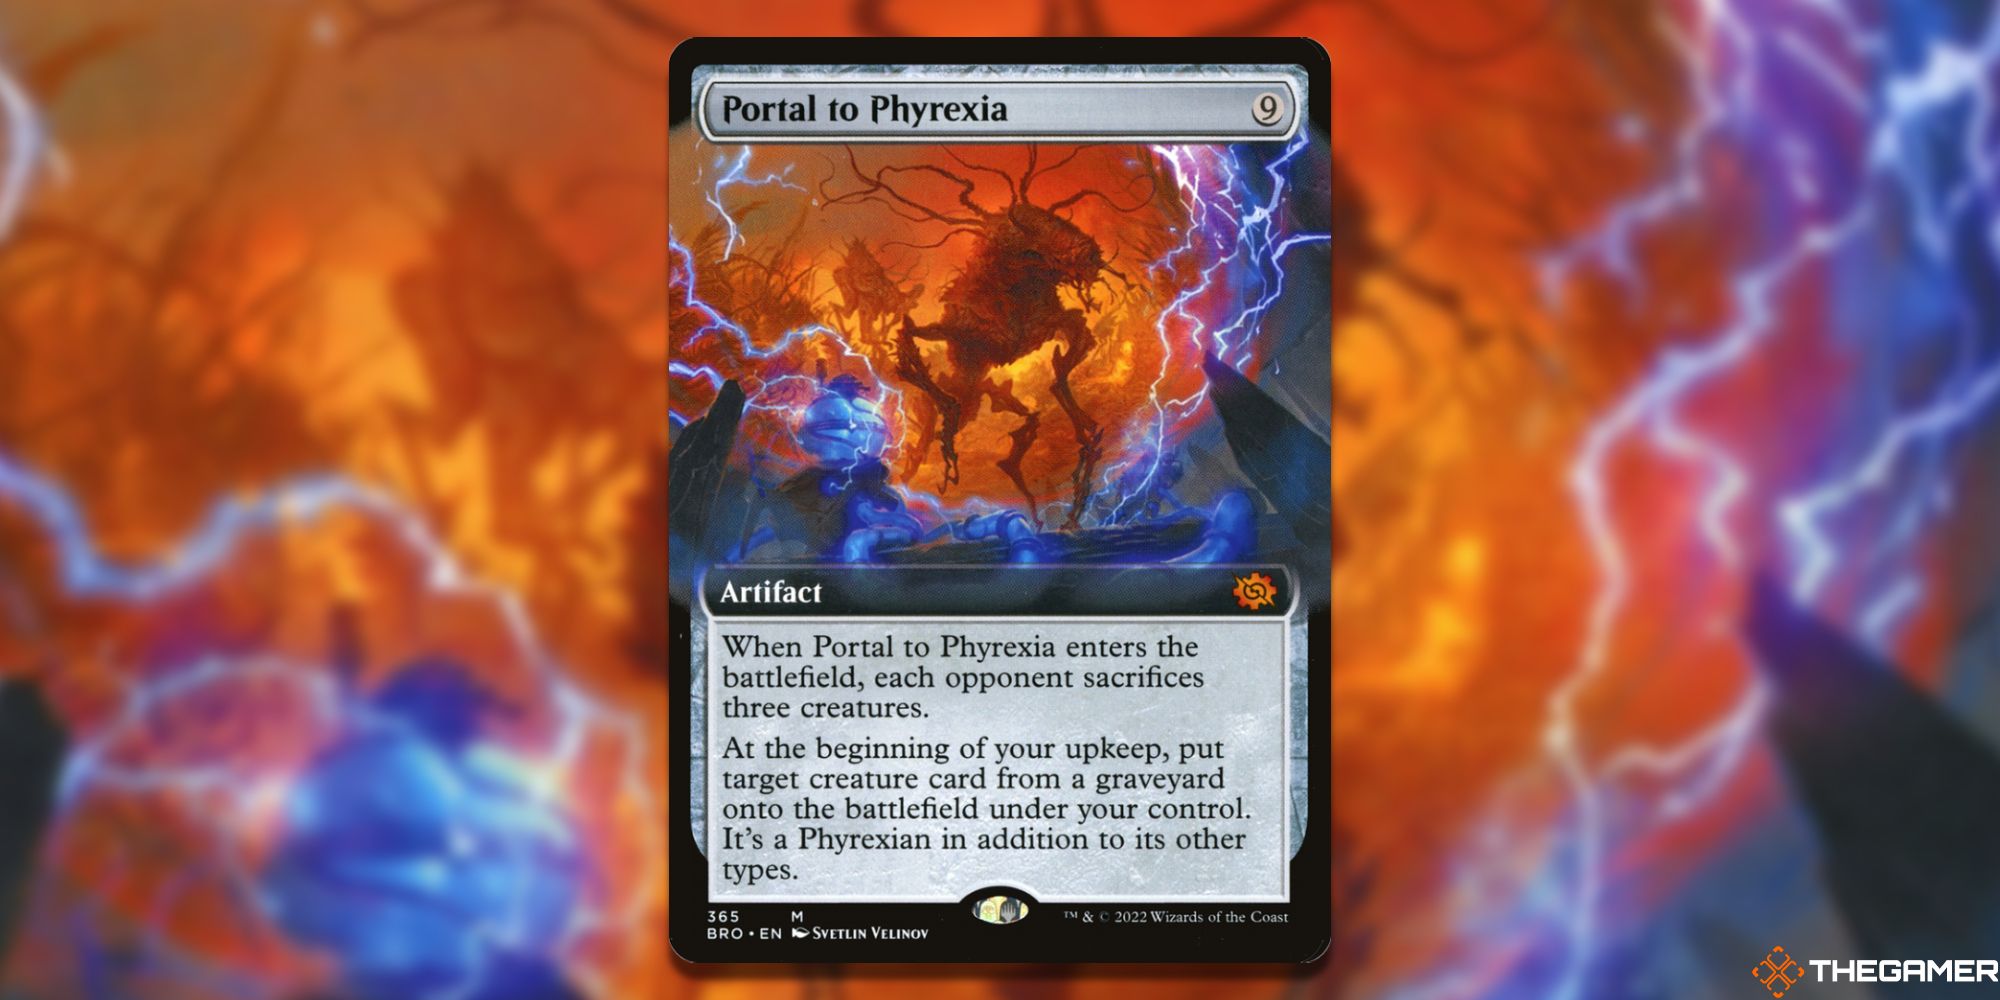 Image of the Portal to Phyrexia card in Magic: The Gathering, with art by Svetlin Velinov